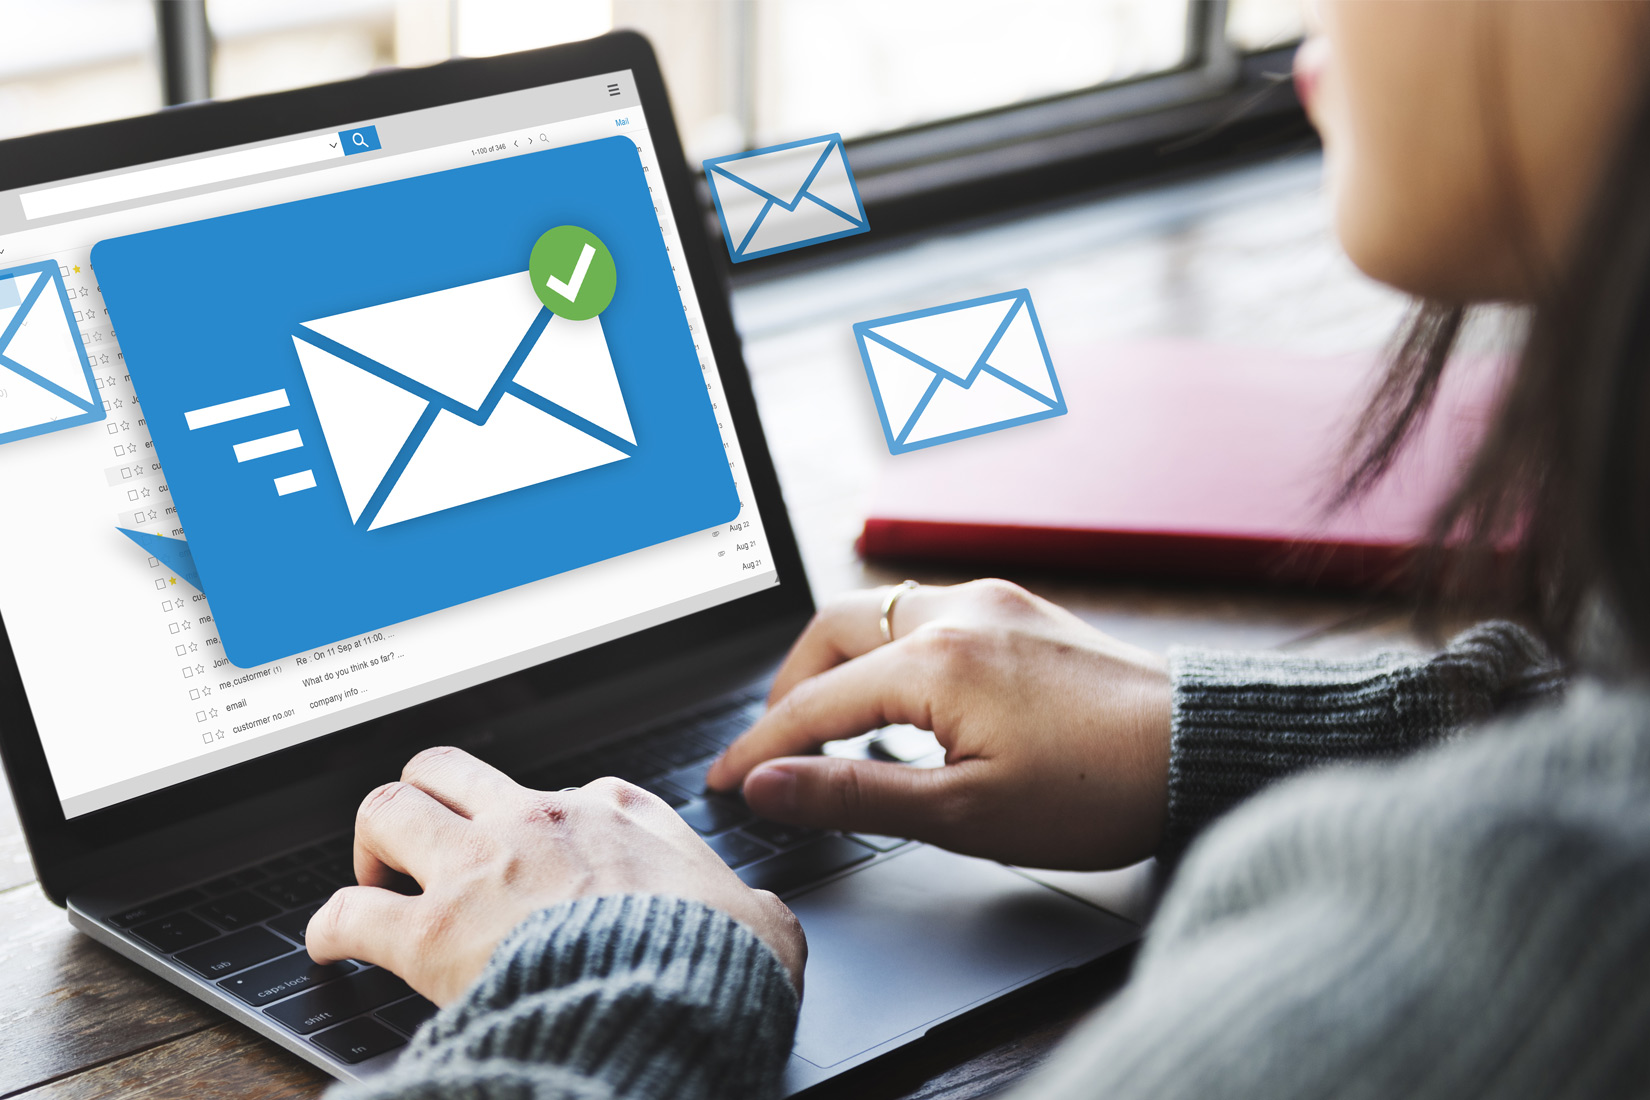 Microsoft Outlook Inbox Management Tools To Streamline Your Email Inbox